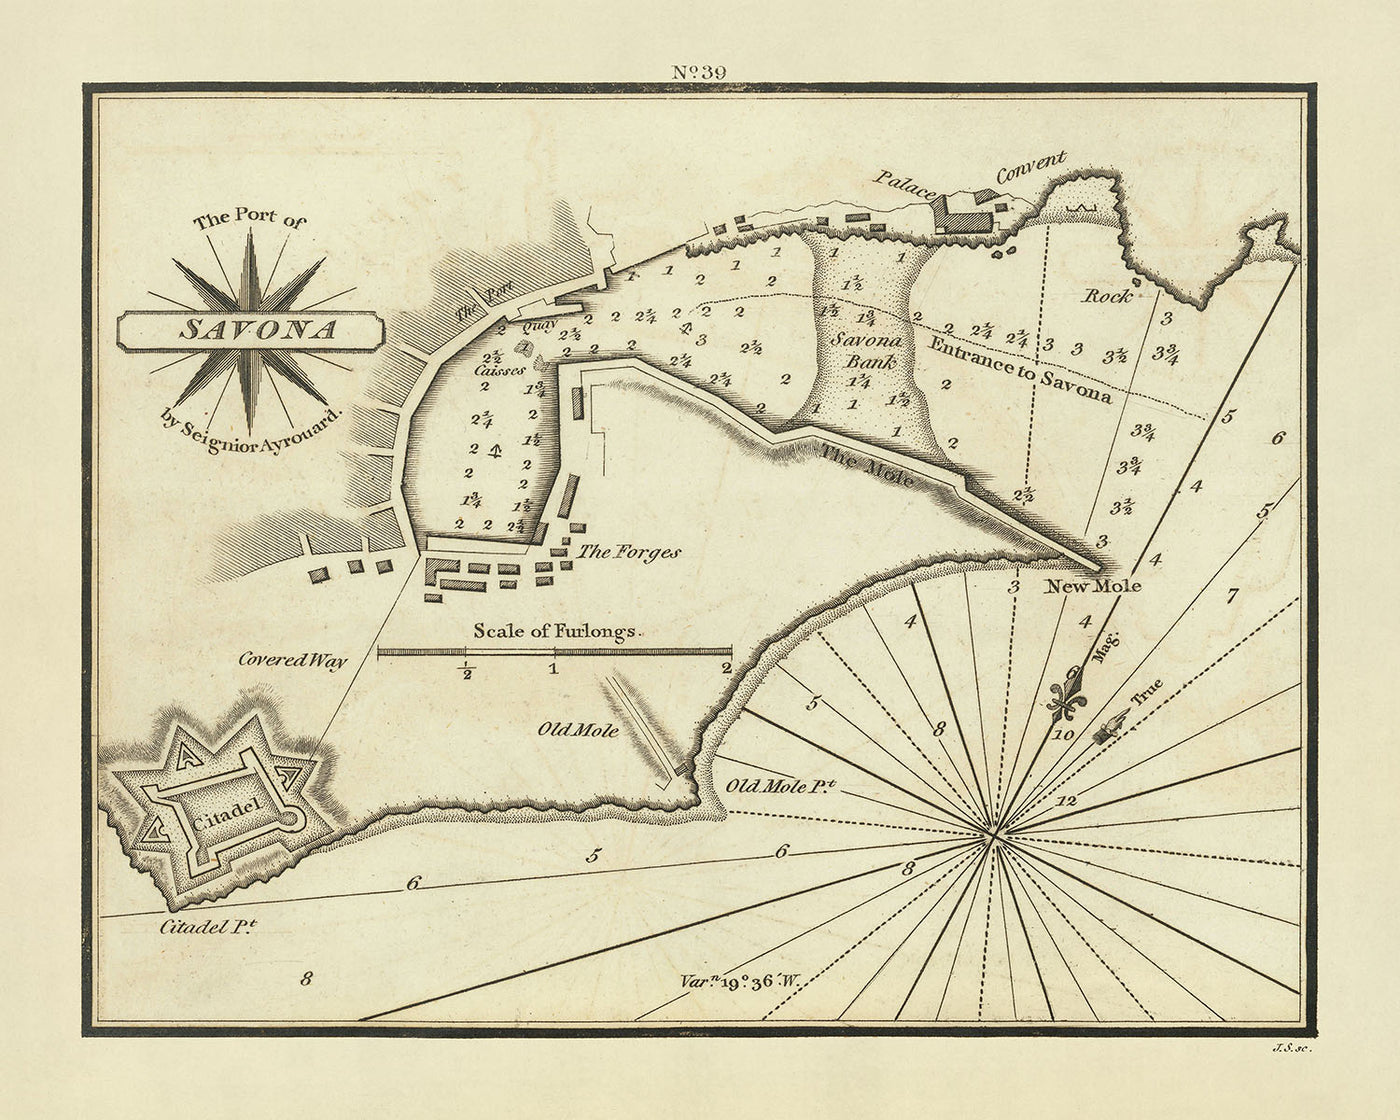 Old Port of Savona Nautical Chart by Heather, 1802: Harbor, Citadel, Convent